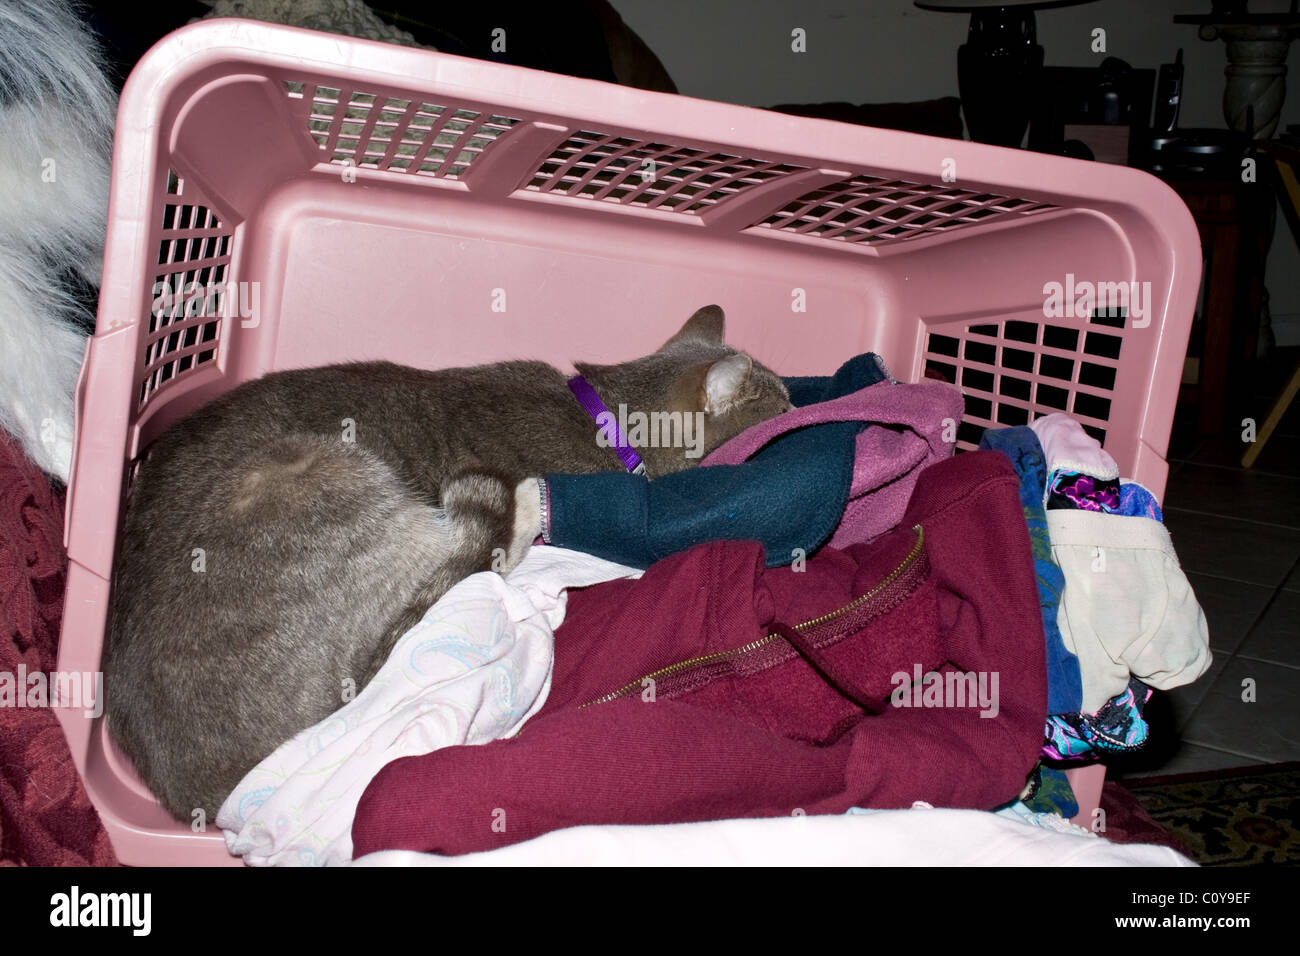 Cat sleeping among the clothes in a laundry basket Stock Photo